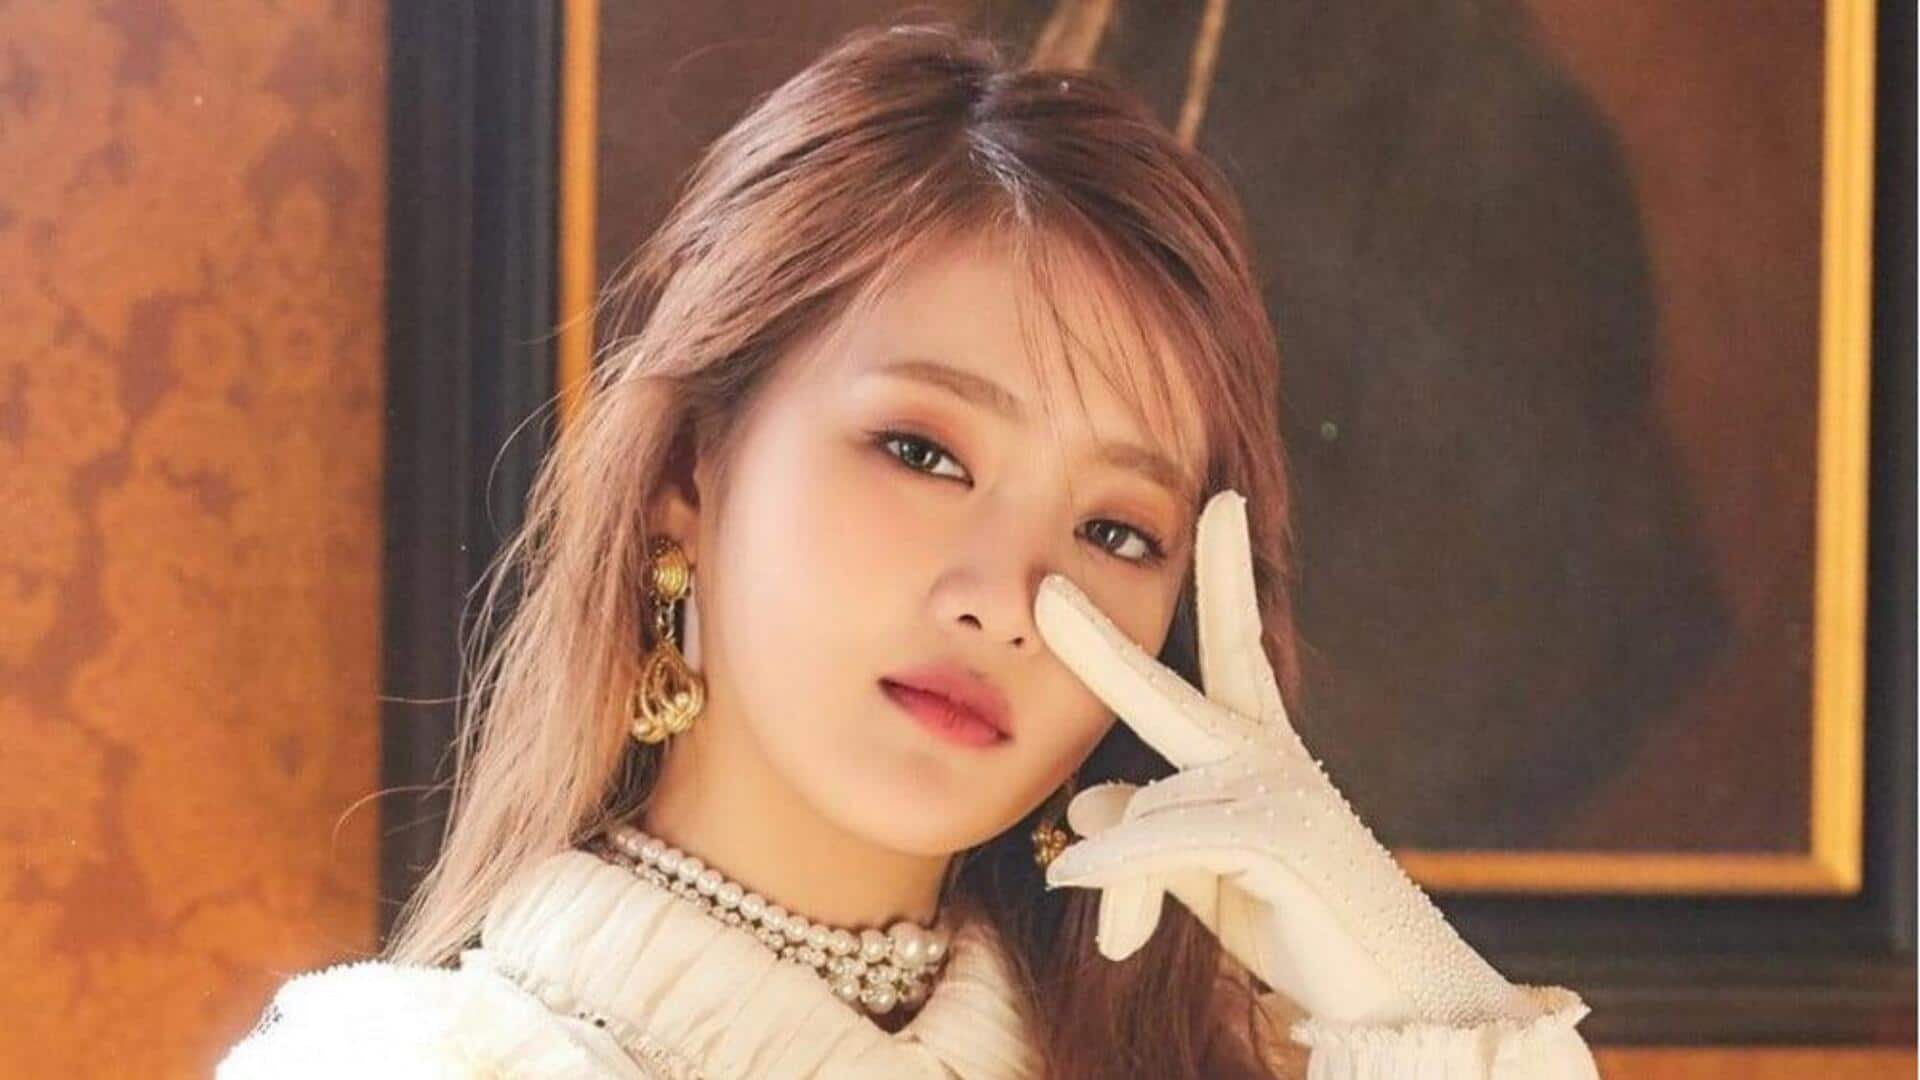 Is (G)I-DLE's Minnie alright now? Agency issues statement